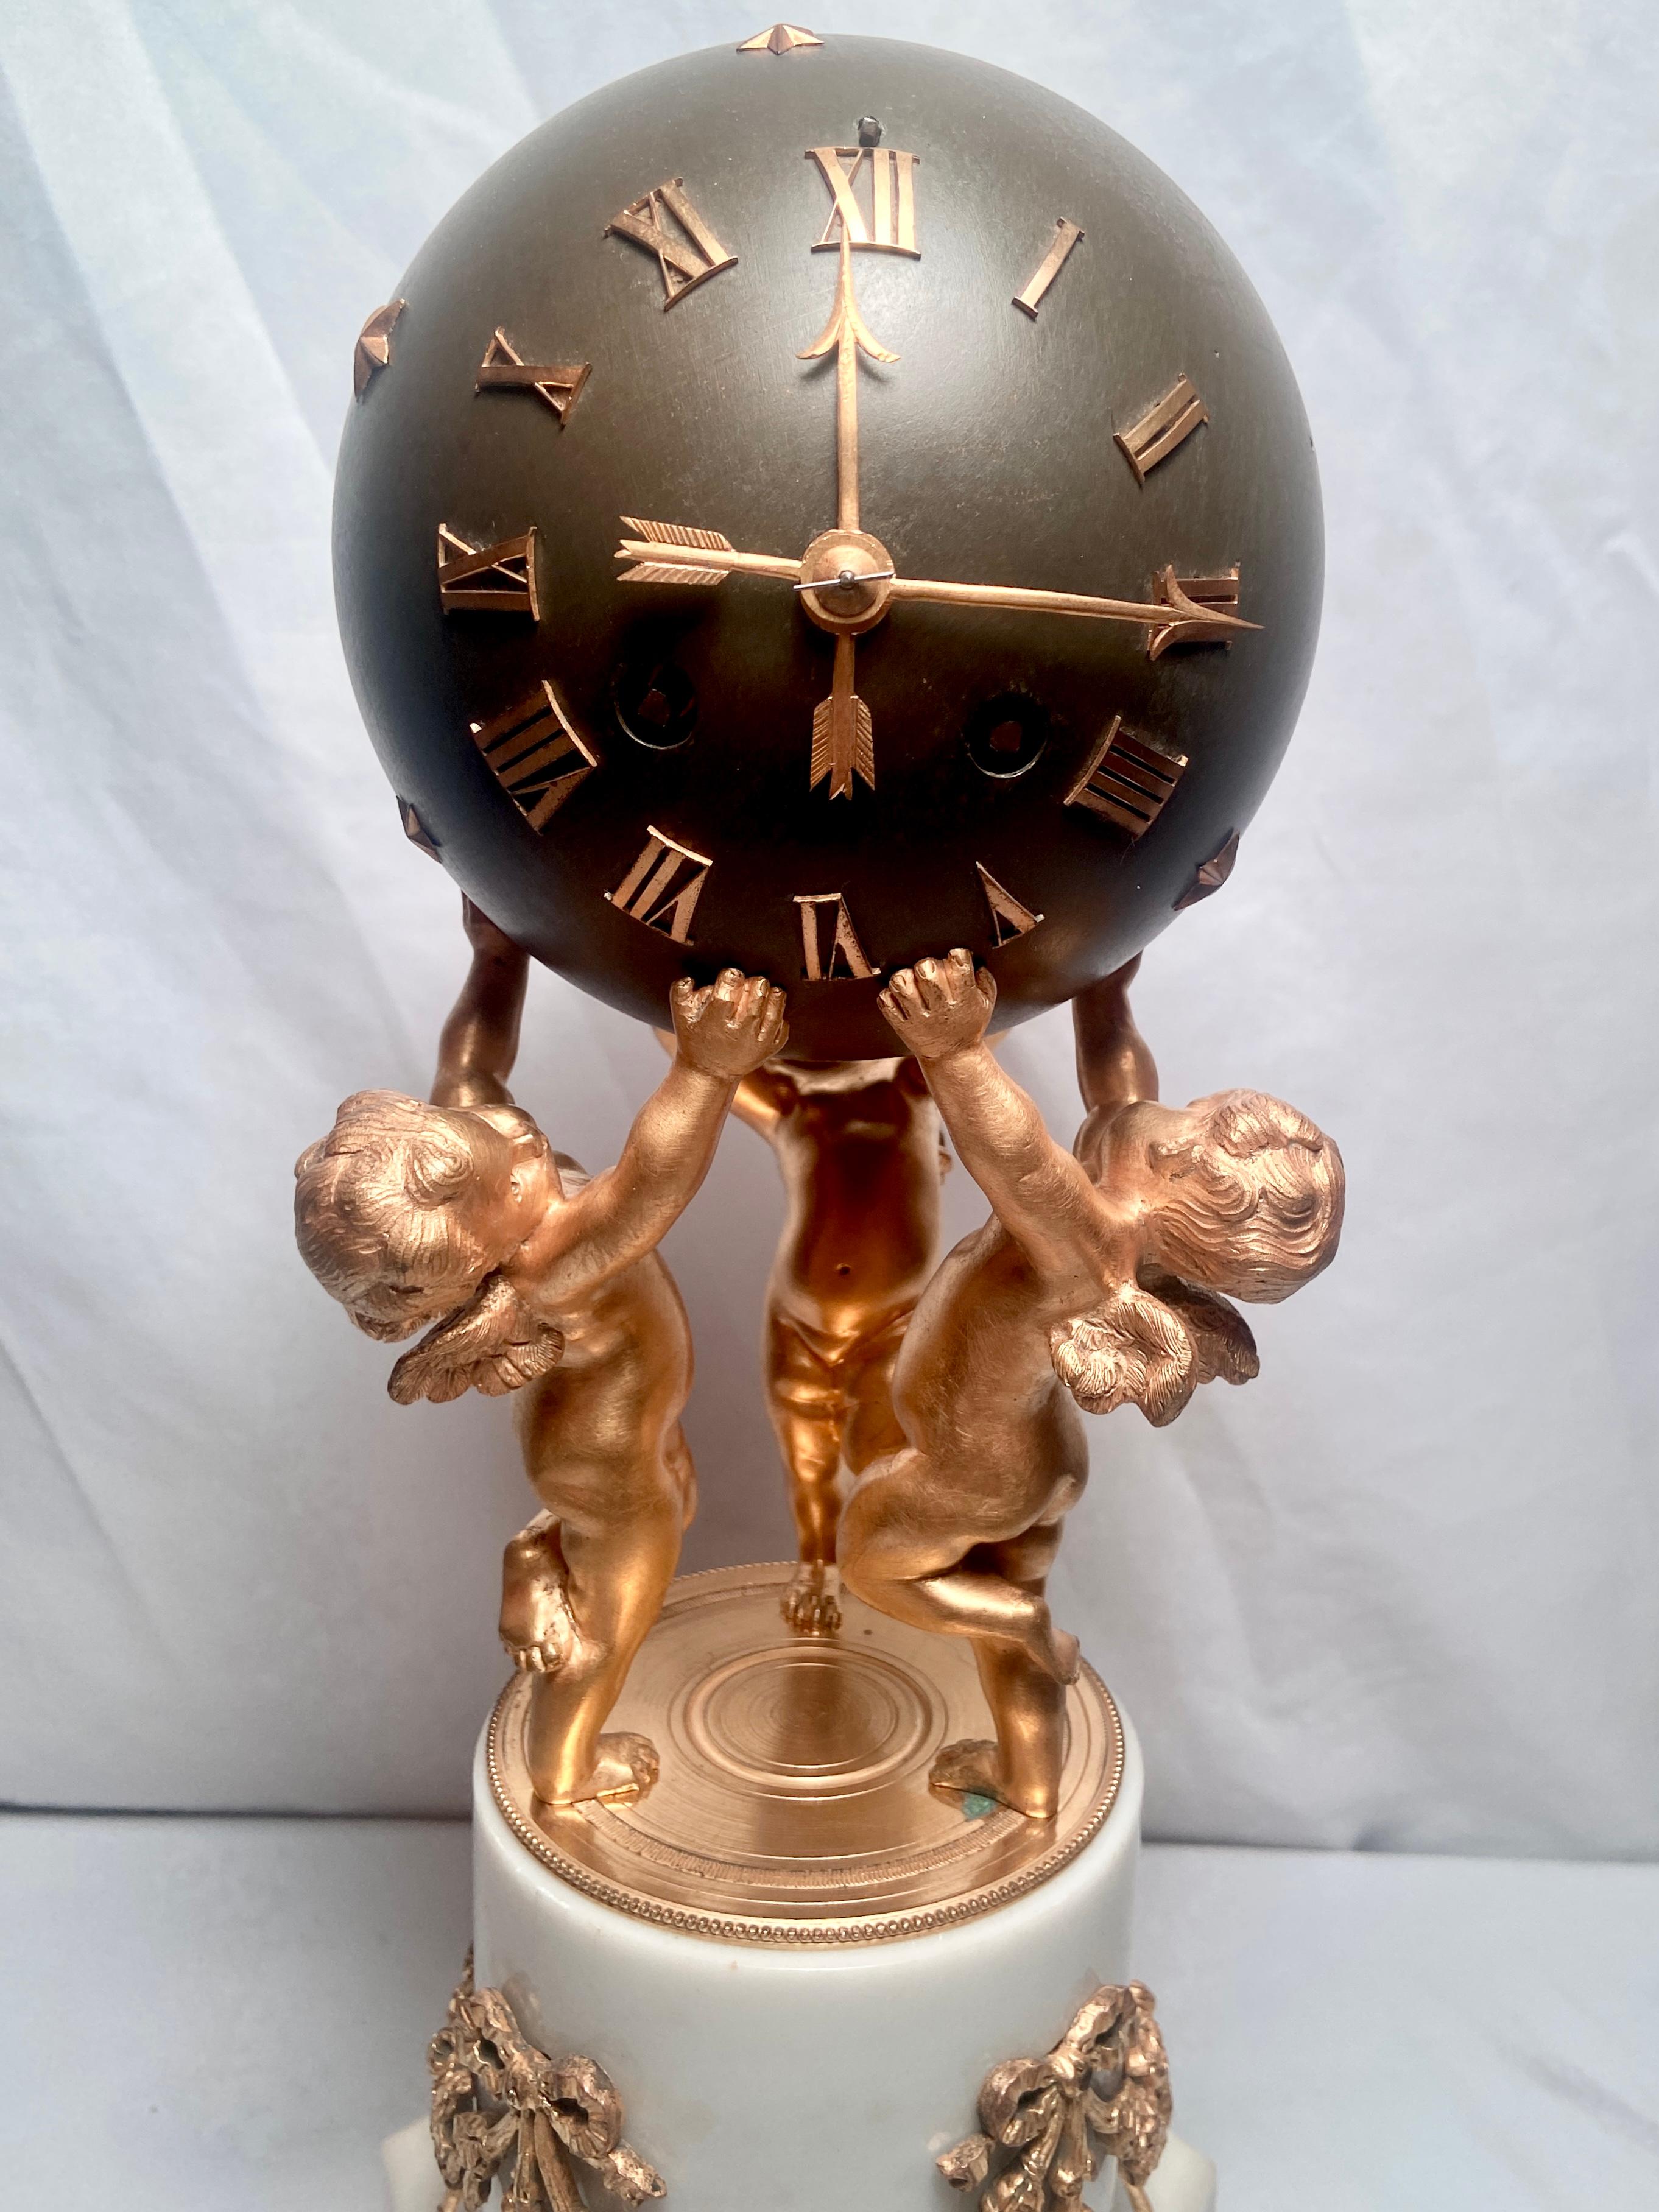 Antique French Louis XVI style ormolu and patinated bronze clock with cherubs, circa 1860-1870.